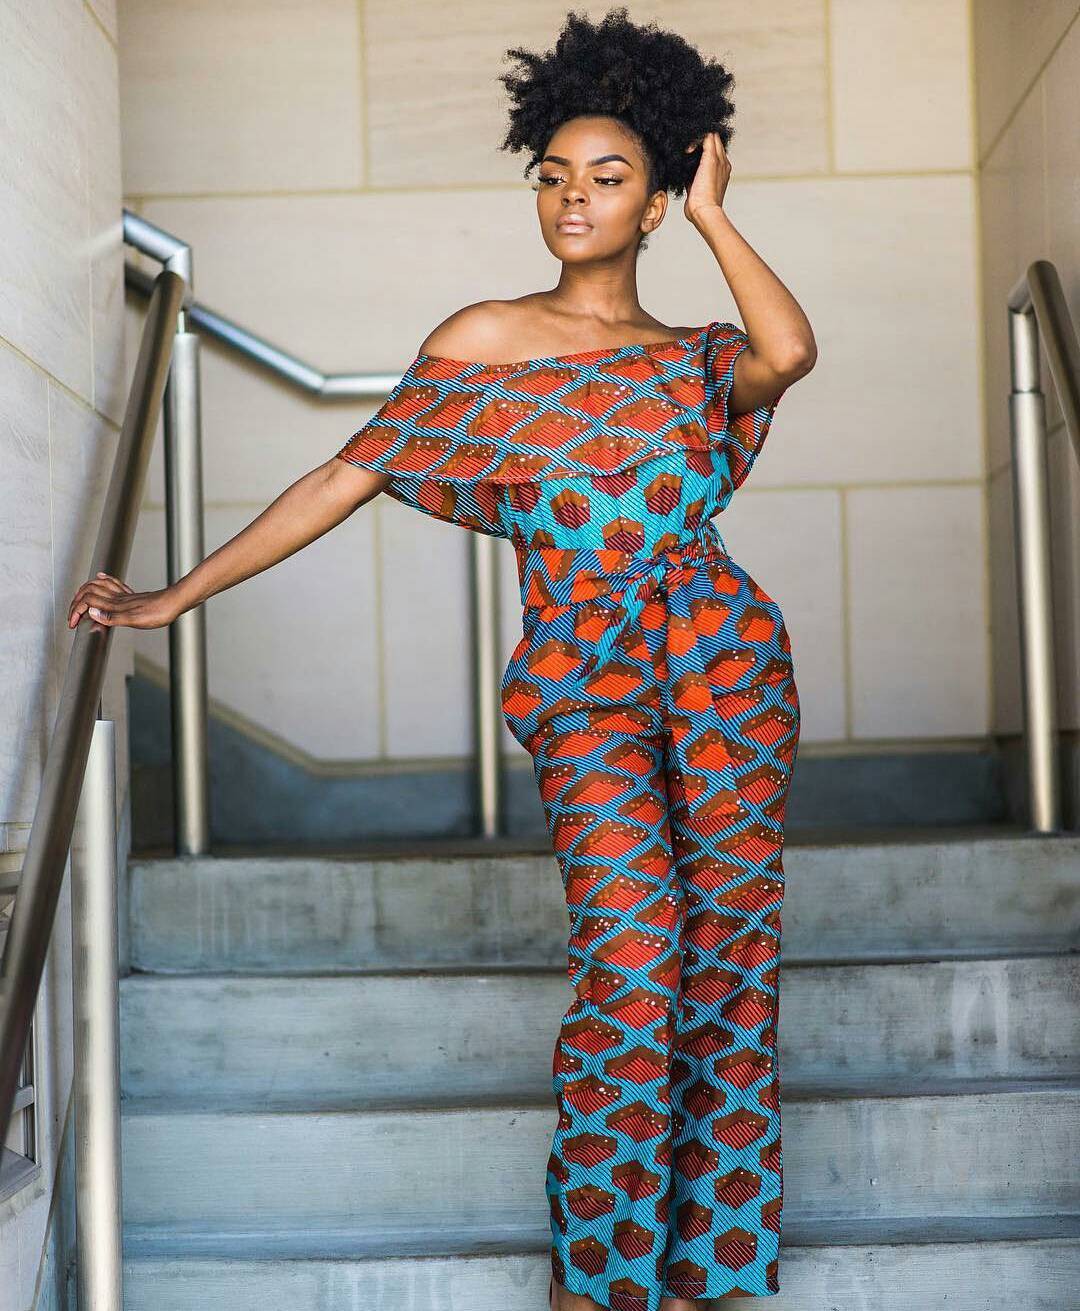 African Dresses For Women - Photos All Recommendation